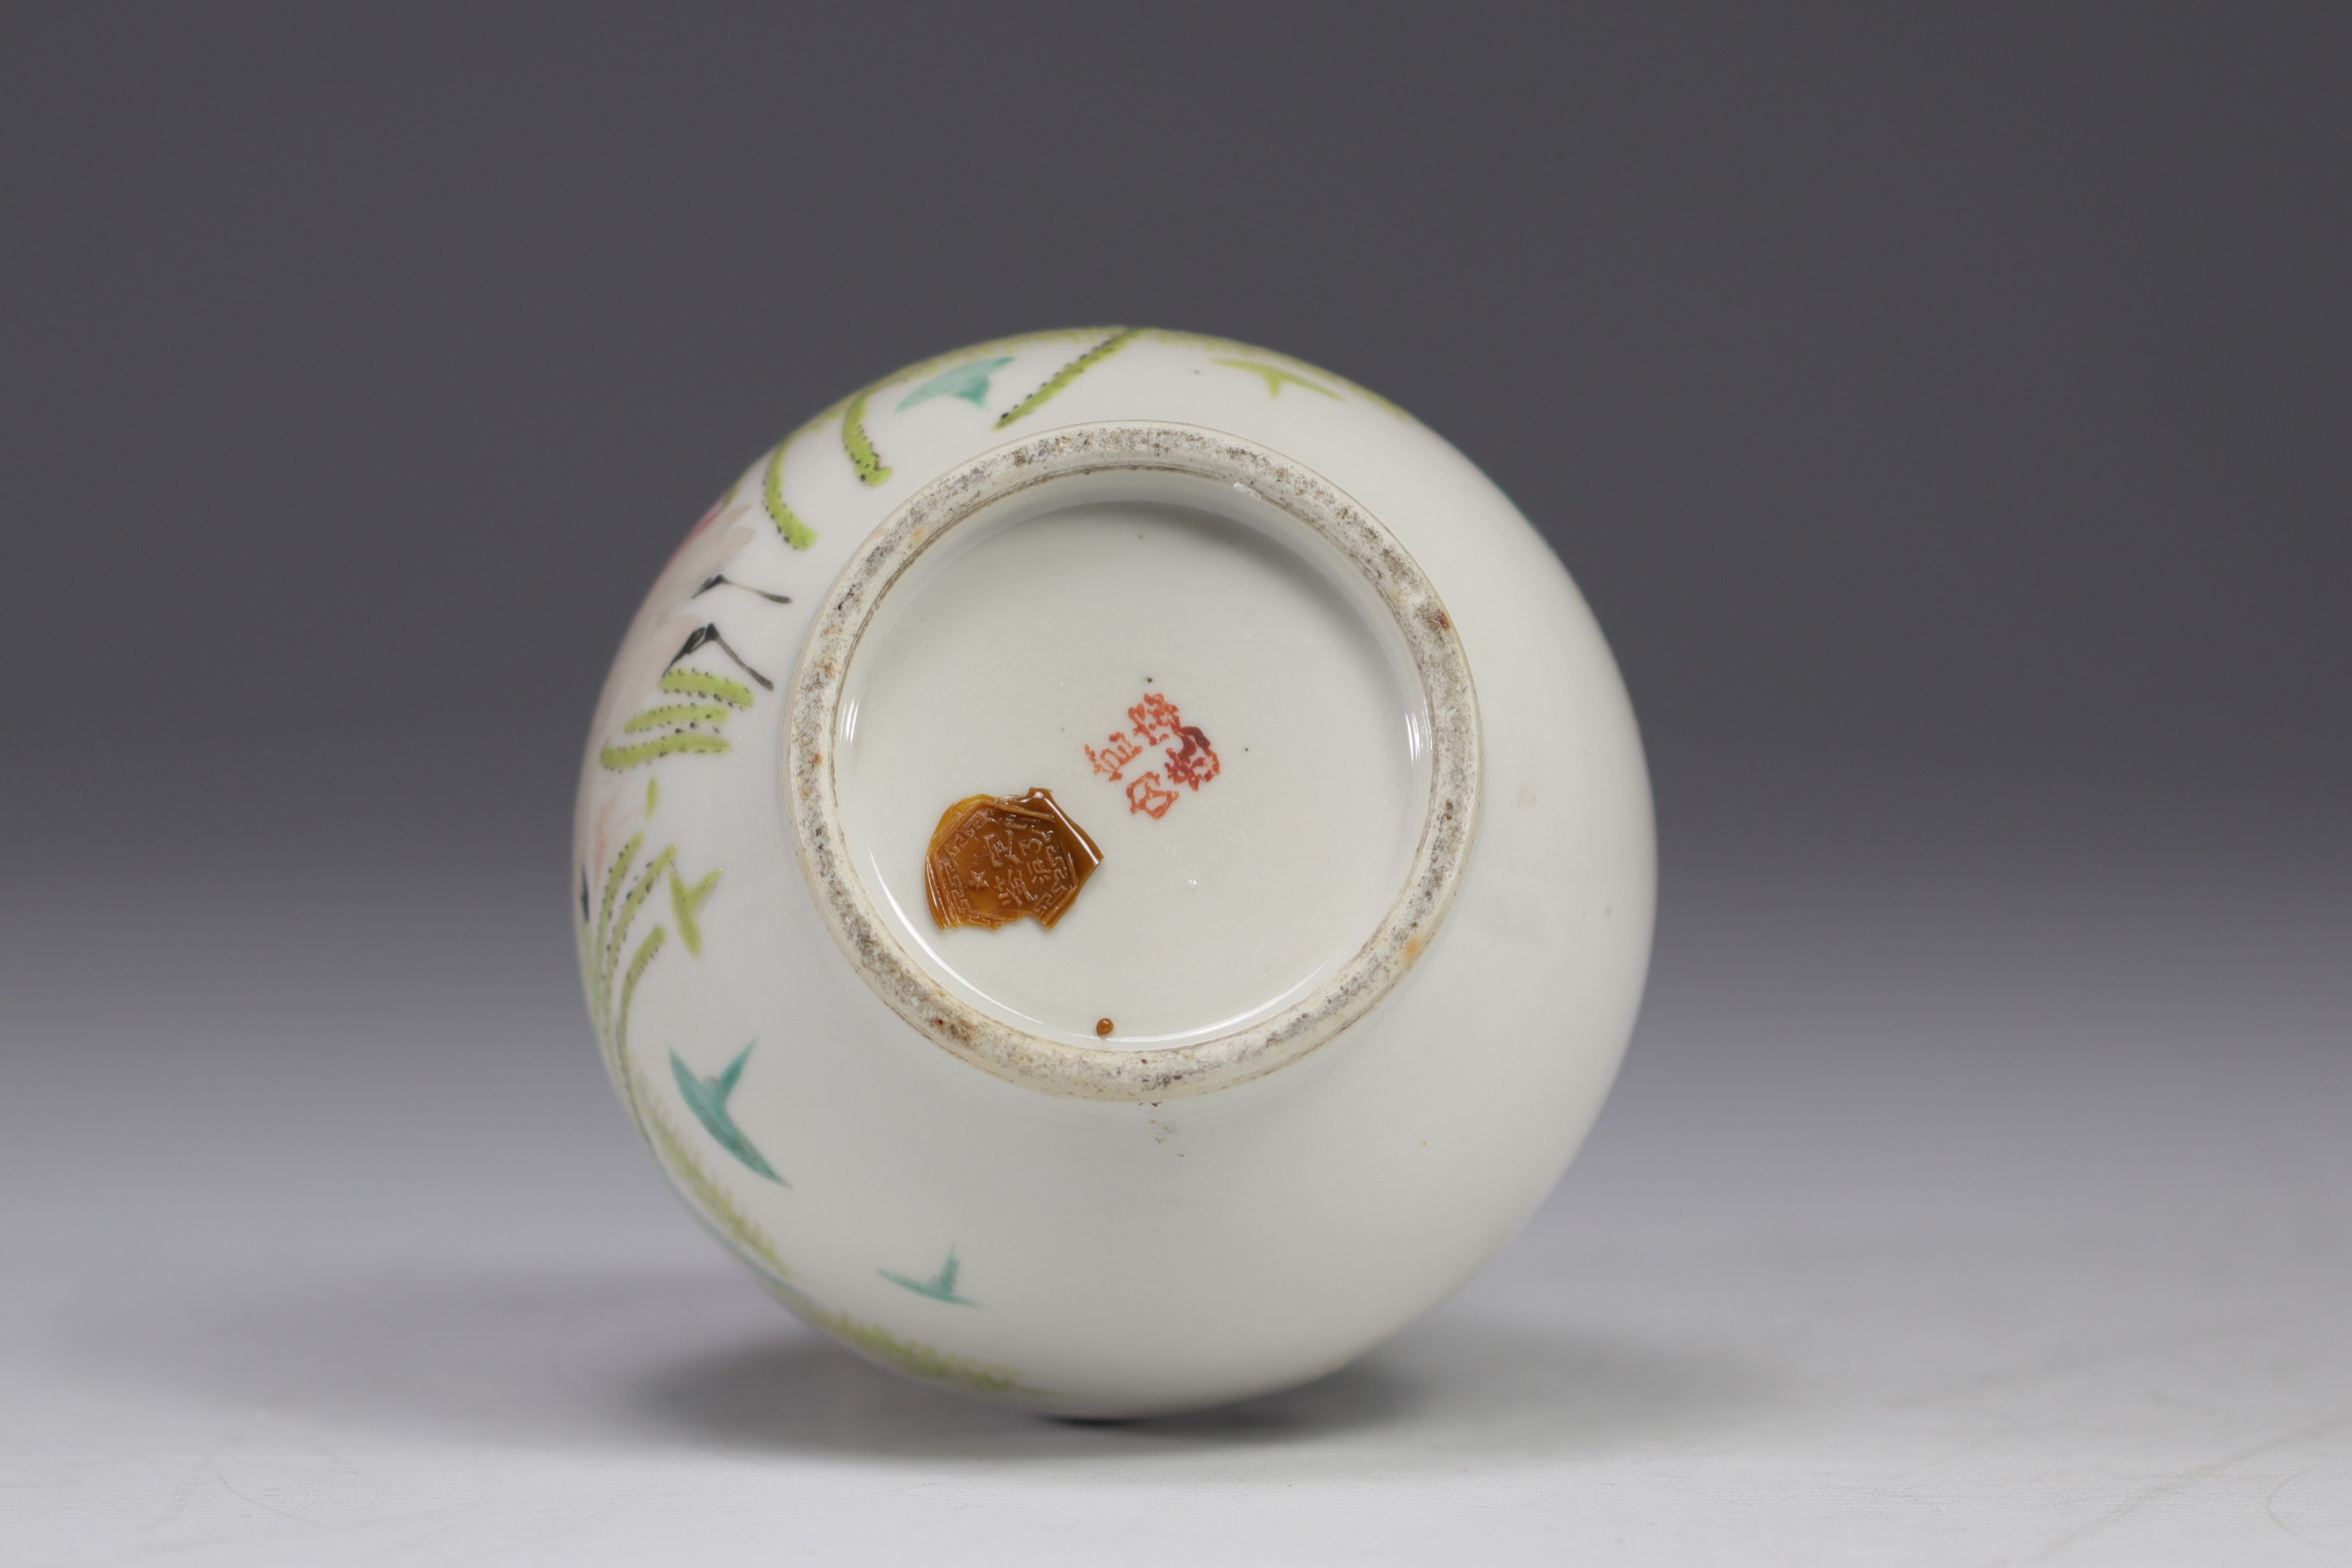 China, Qianjiang cai porcelain vase decorated with flowers and birds, 19th century. - Image 5 of 6